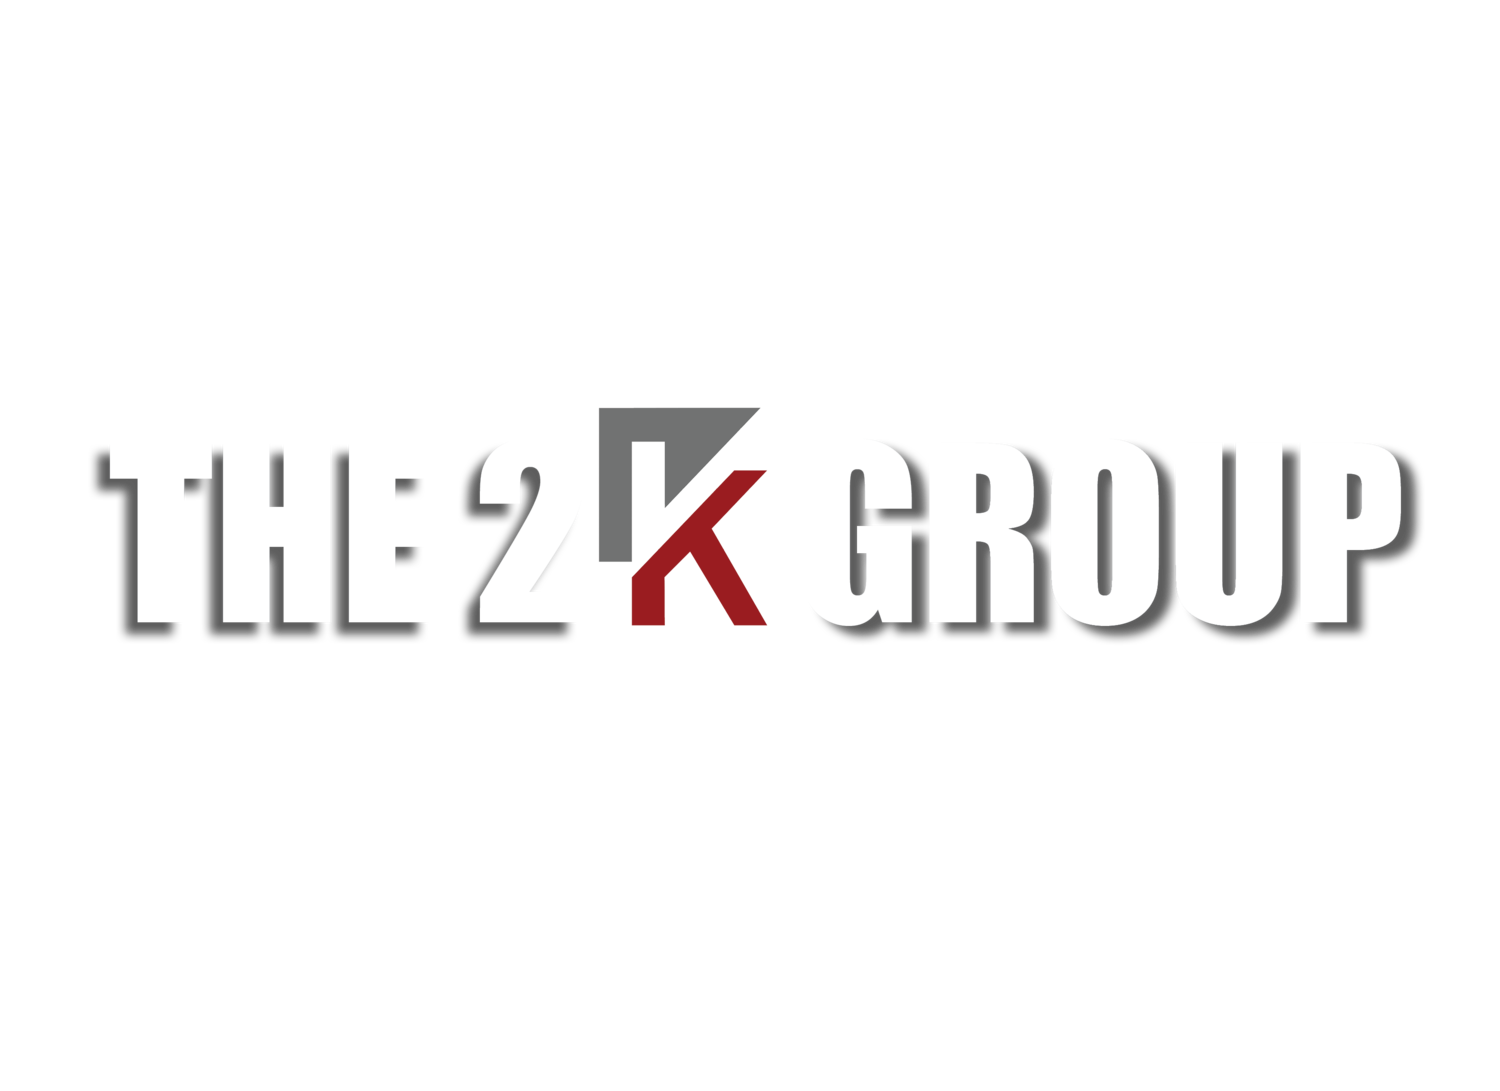 The 2K Group